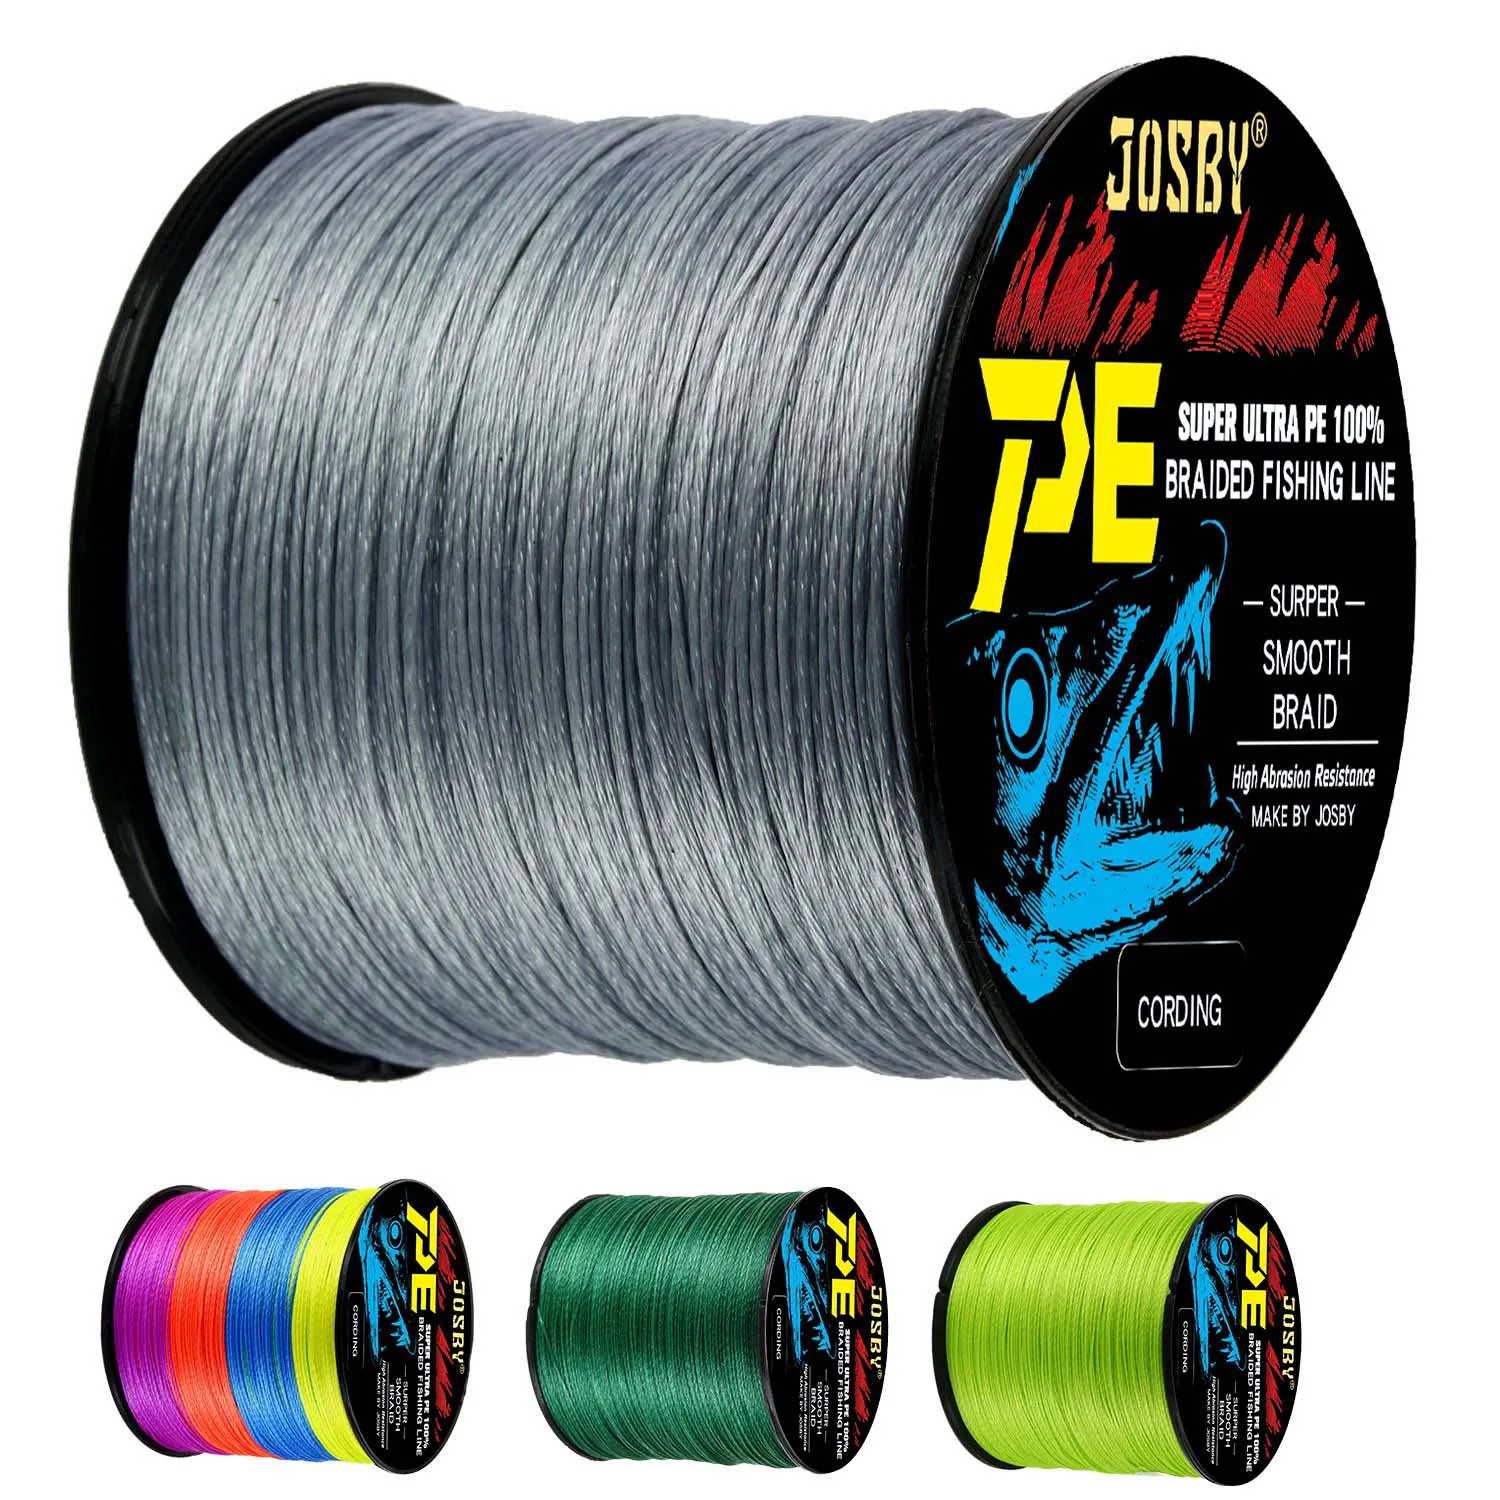 

9 Strand Japan Super Strong 100% PE Braided Fishing Line Saltwater Durable Multifilament Multicolor Weave Extreme 20LB-100LB